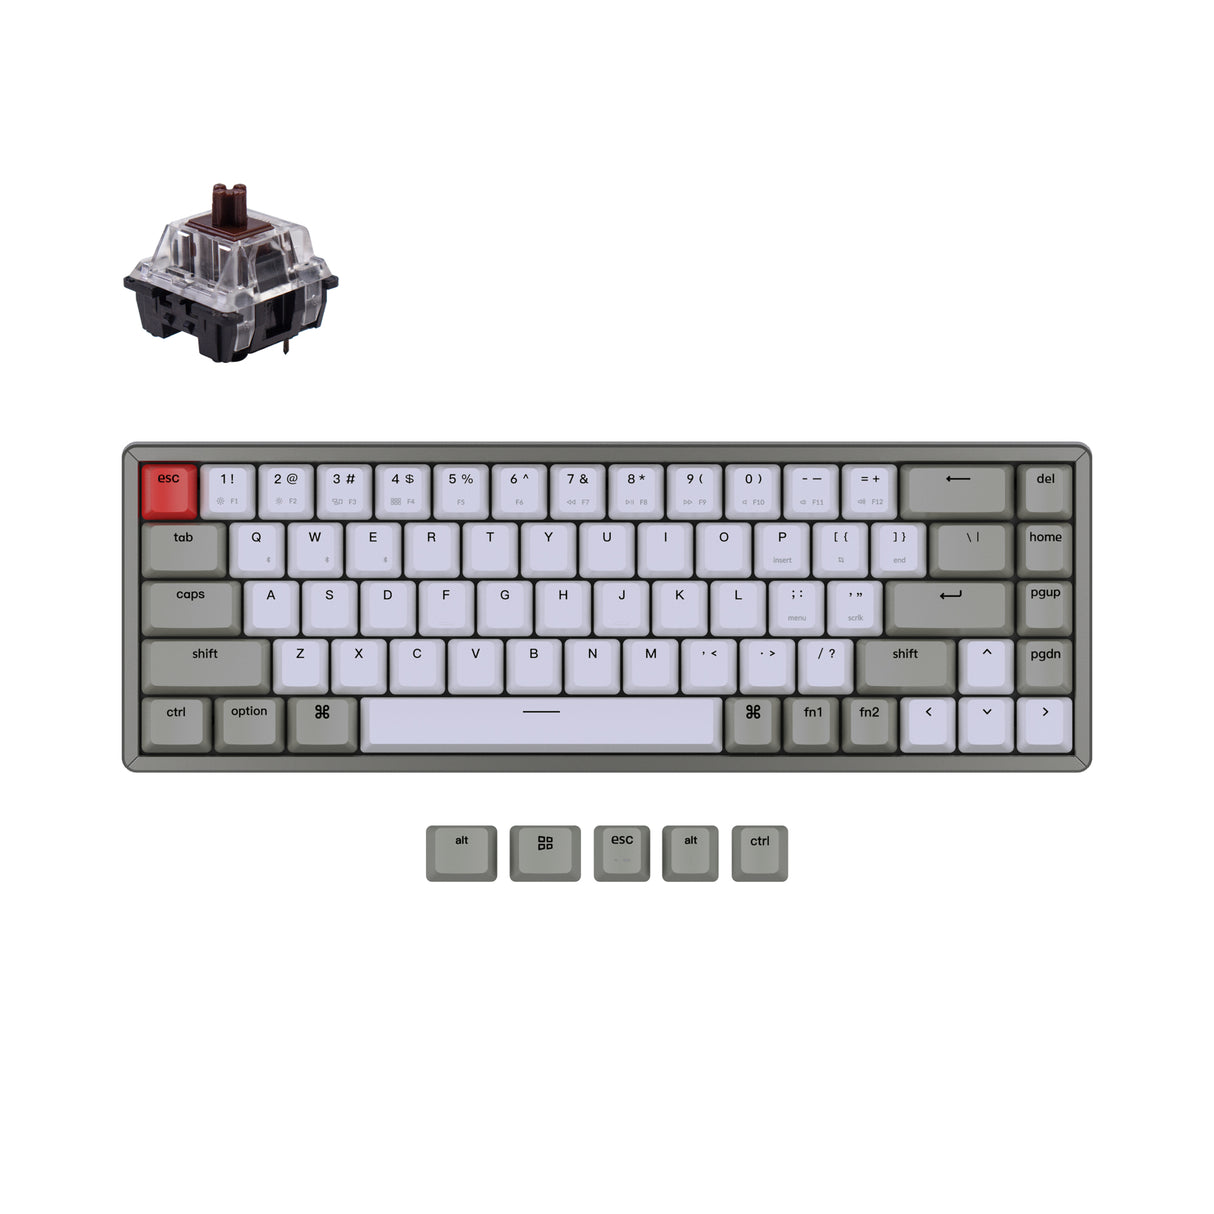 Keychron K6 Non-Backlight Wireless mechanical keyboard has included keycaps for both Windows and macOS. K6 is compatible with Mac, Windows, iOS, Android, Linux and it also can connect up to 3 devices. 